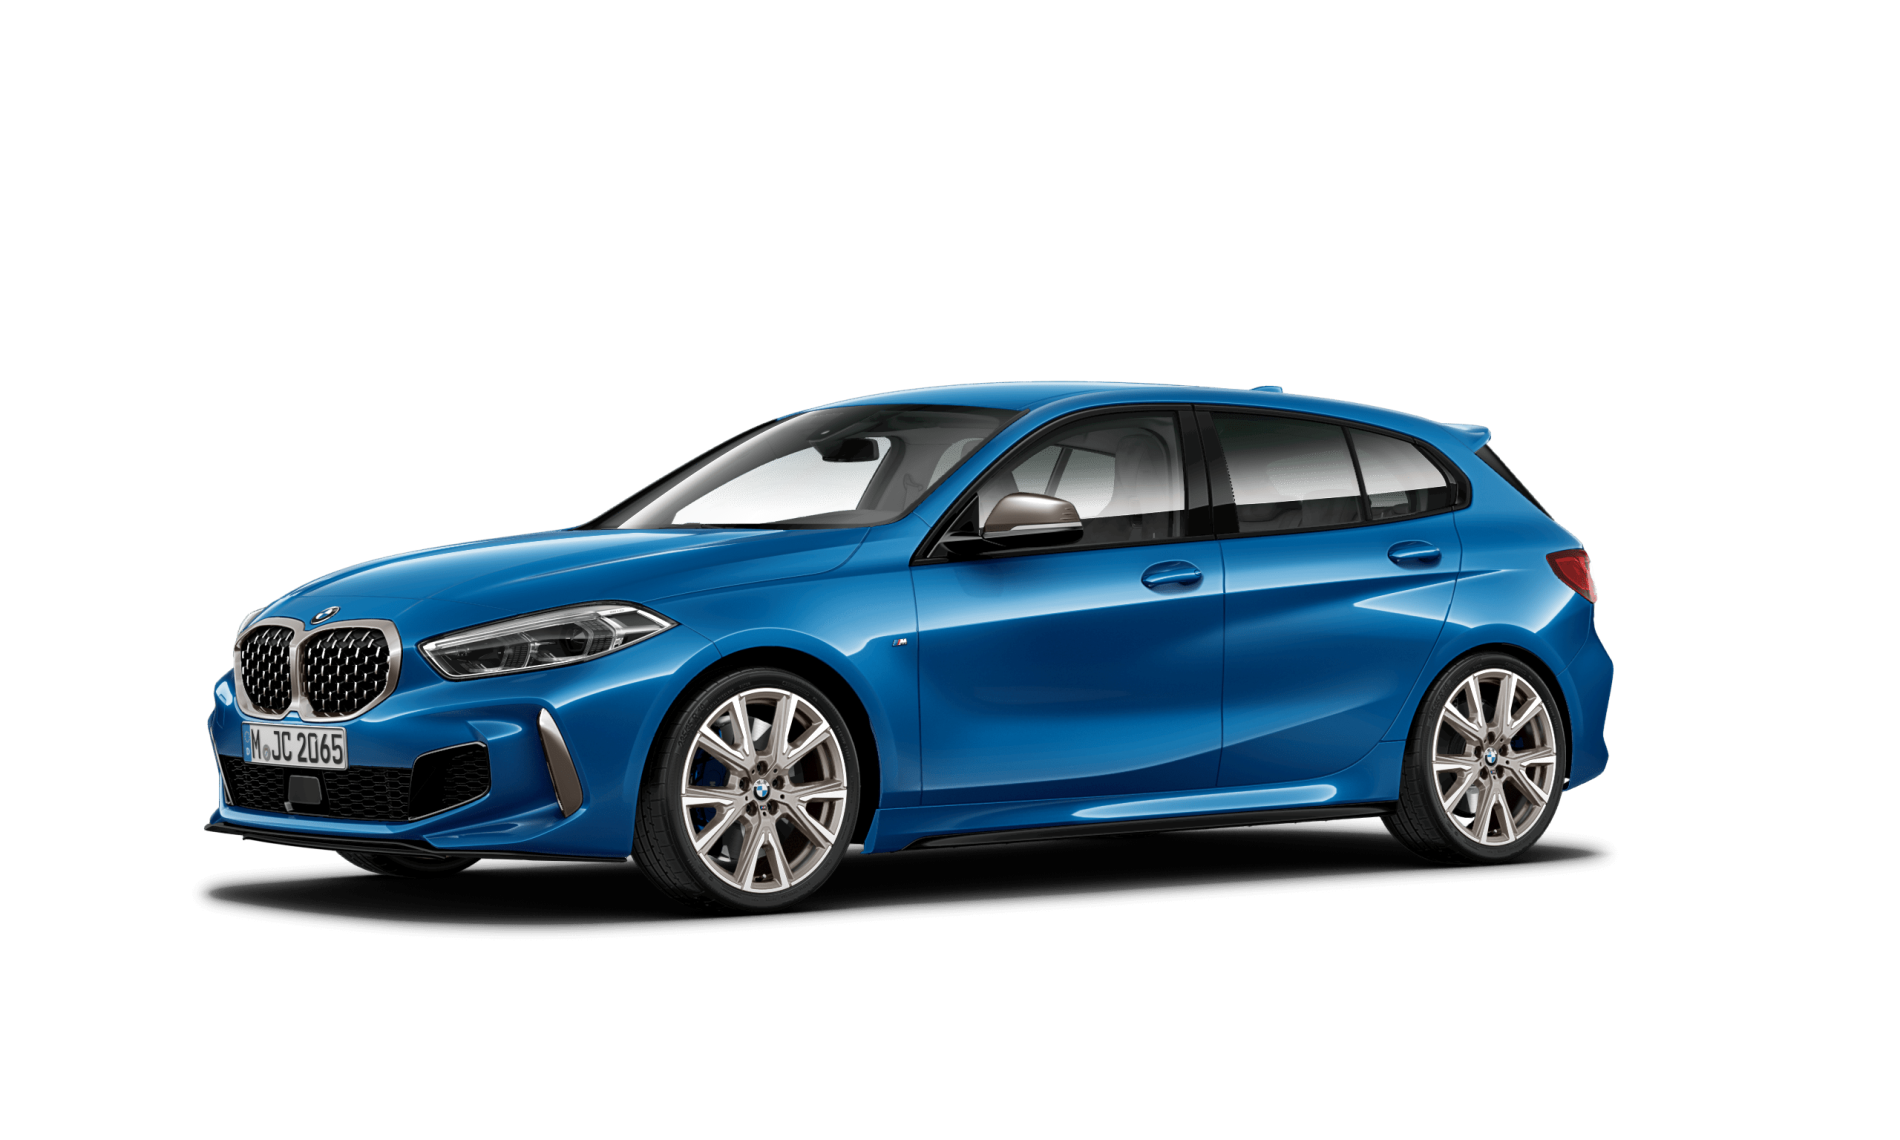 Used BMW 1 Series Car prices in South Africa